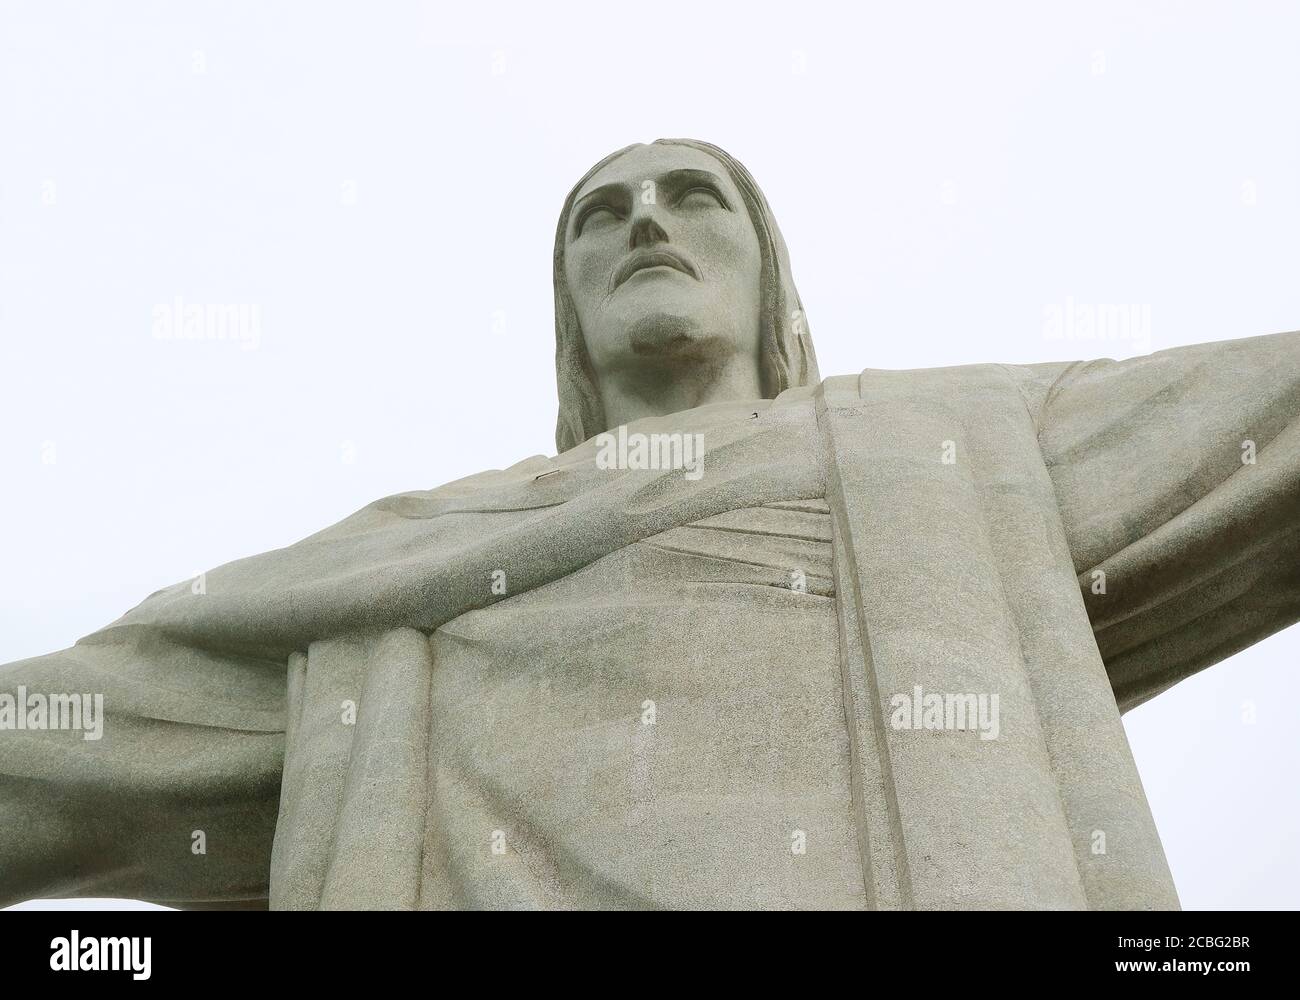 The Statue of Christ the Redeemer, One of the New 7 Wonders of the World Located on Corcovado Mountain in Rio de Janeiro of Brazil Stock Photo